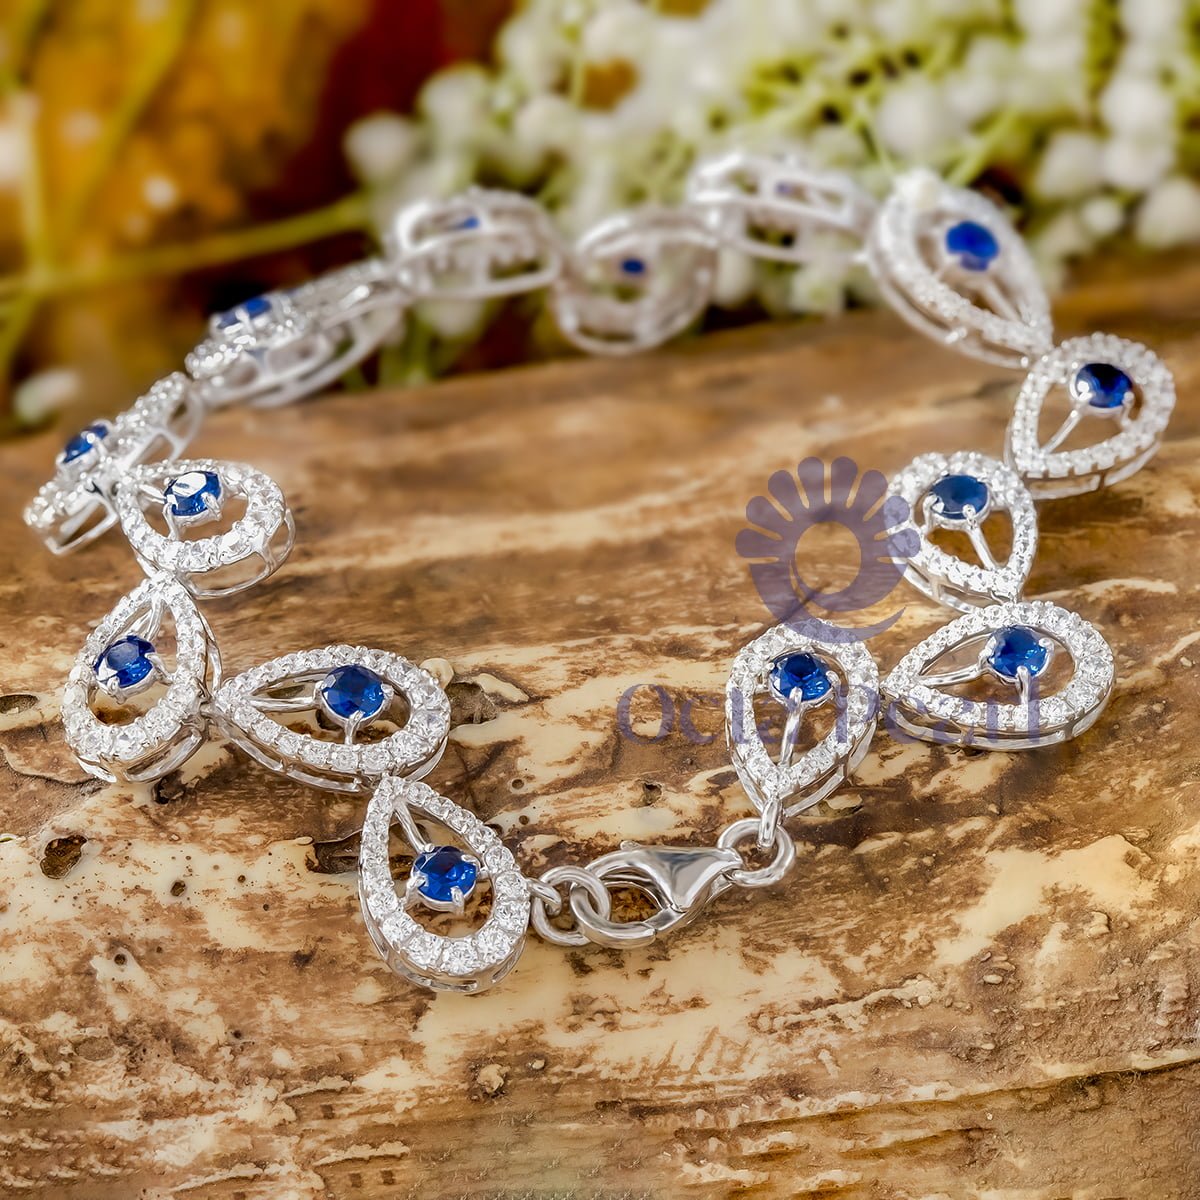 White & Blue Sapphire Round CZ Stone Teardrop Style Beautiful Tennis Bracelet For Any Occasion